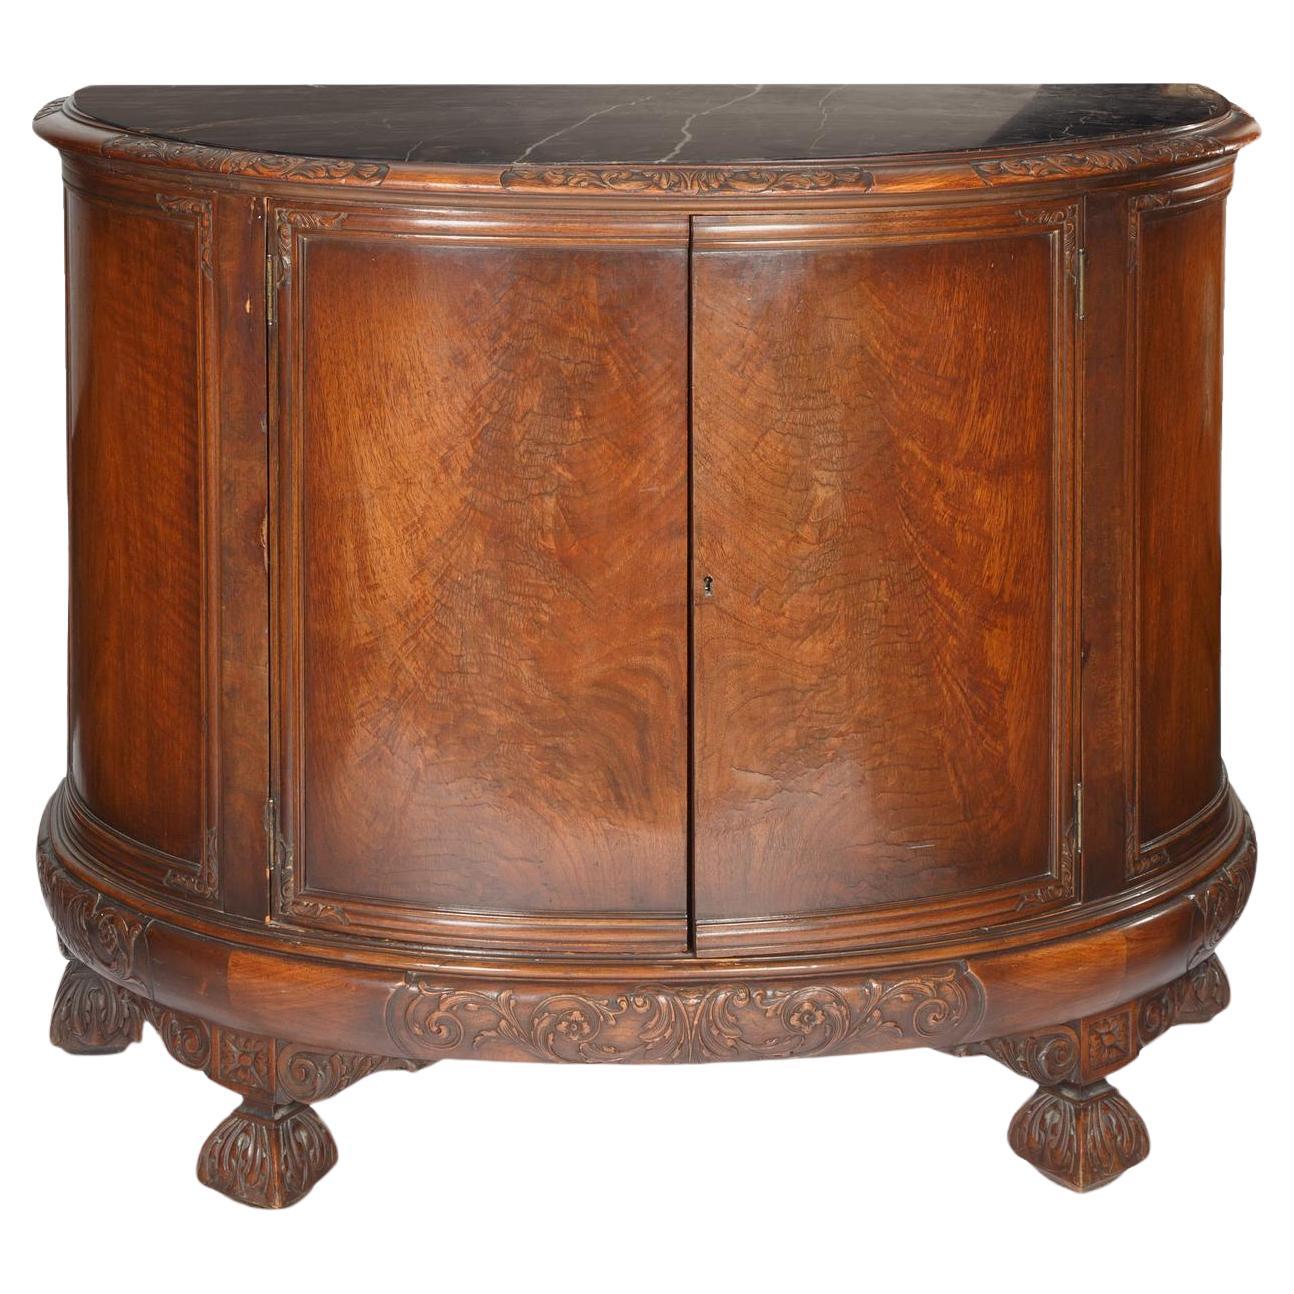 French Mahogany Wood Demilune Shape Marble Inserted Top Sideboard / Server For Sale